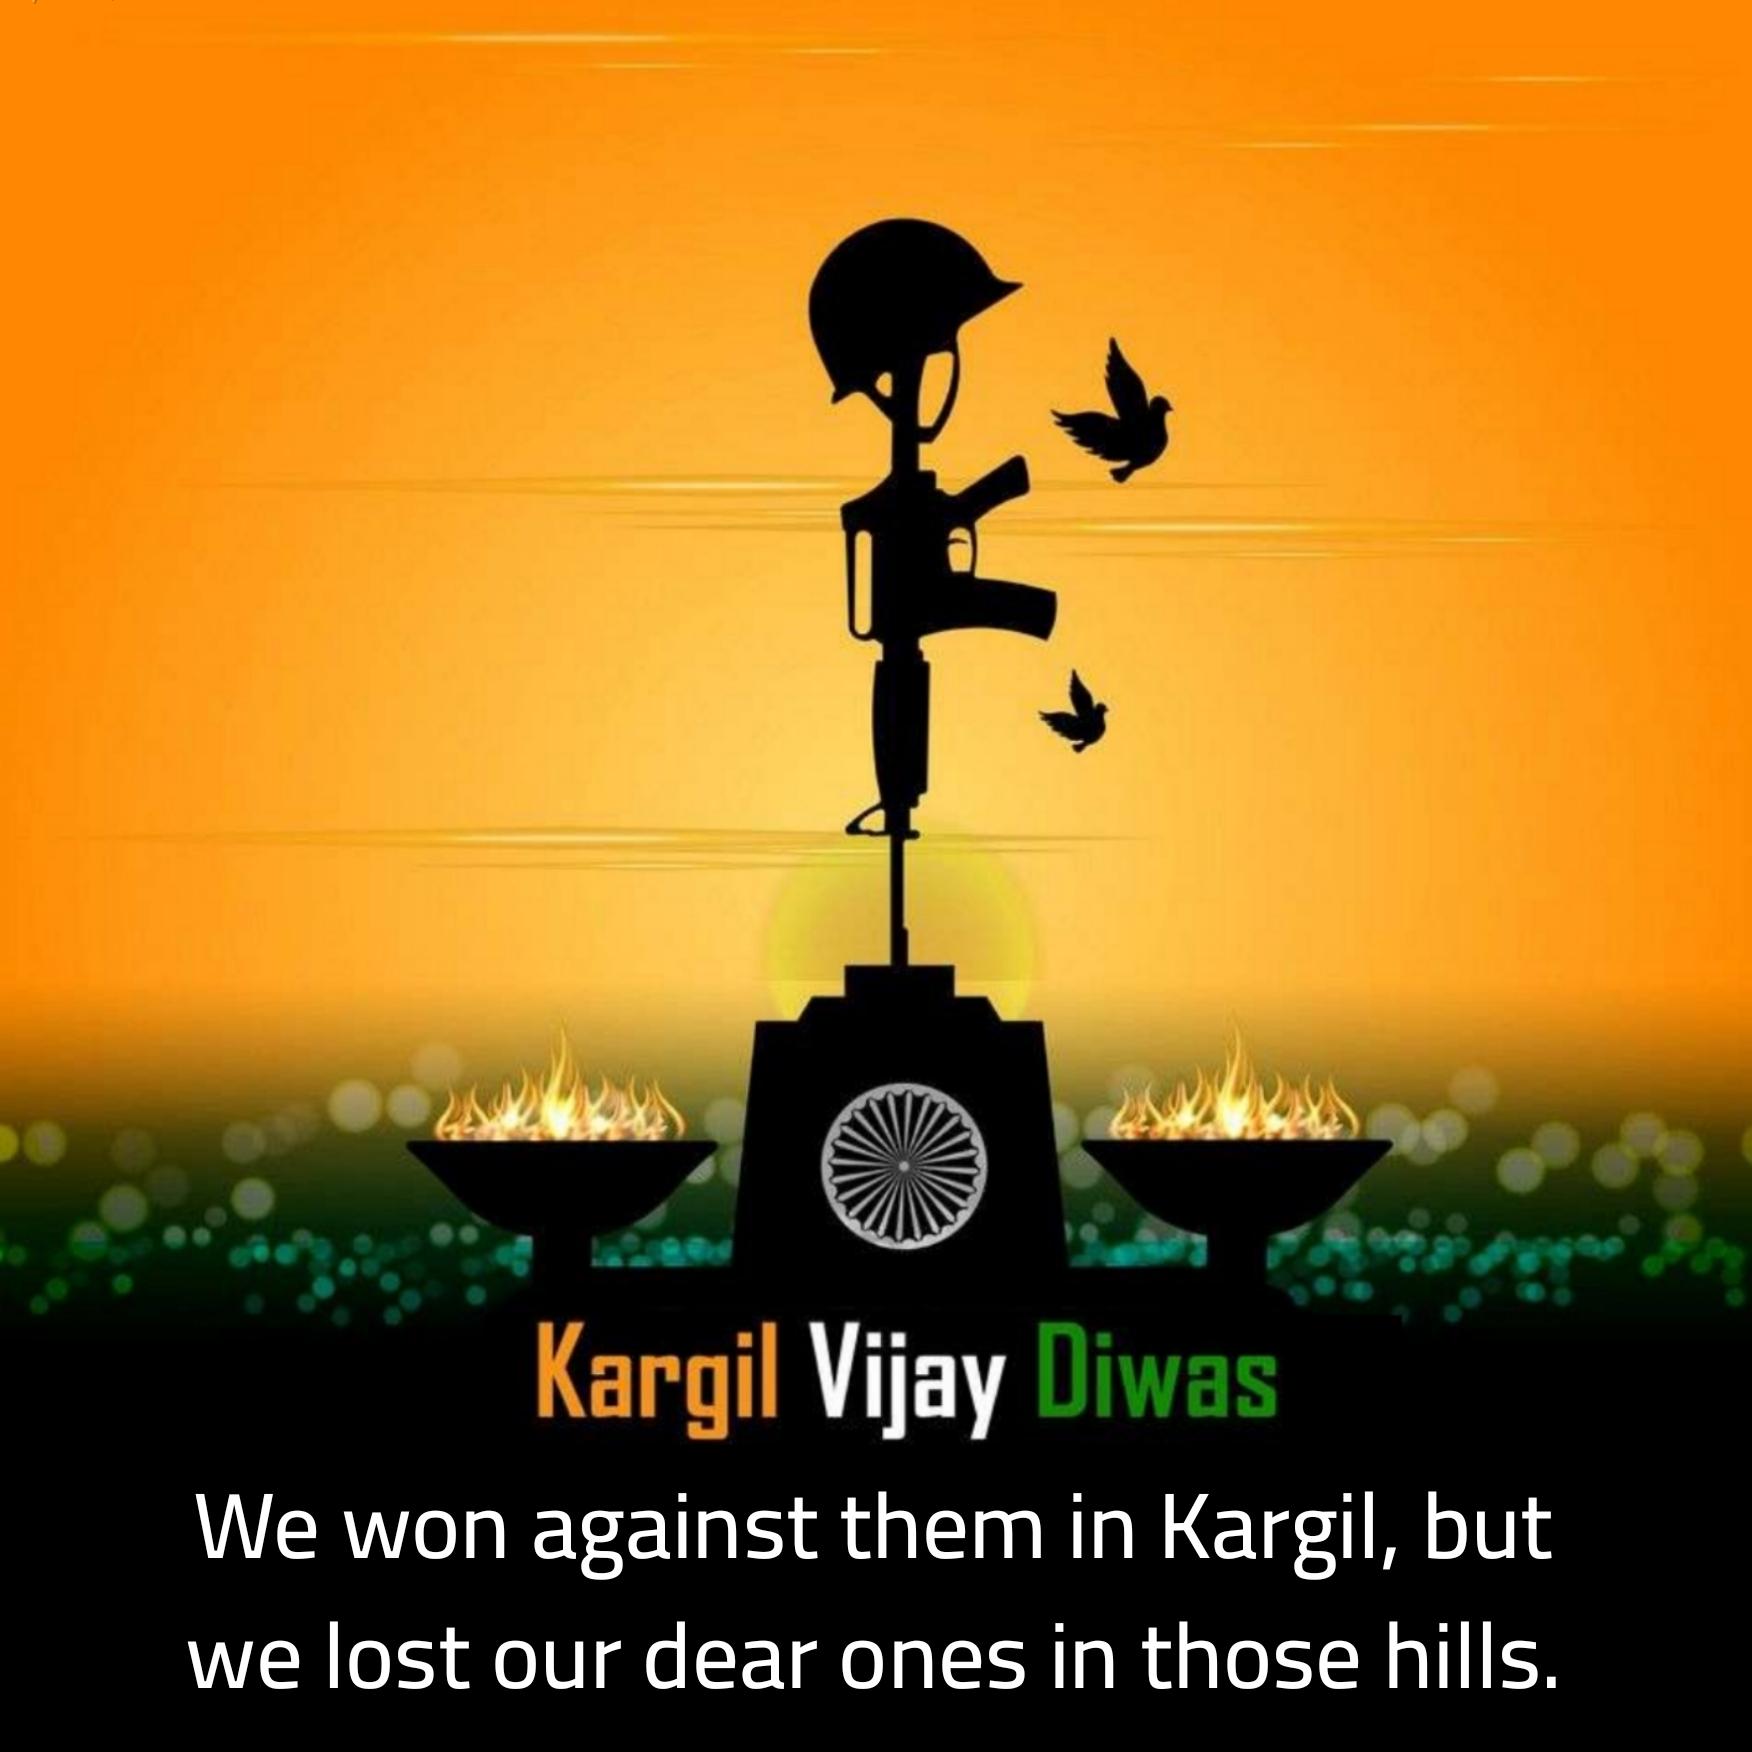 We won against them in Kargil but we lost our dear ones